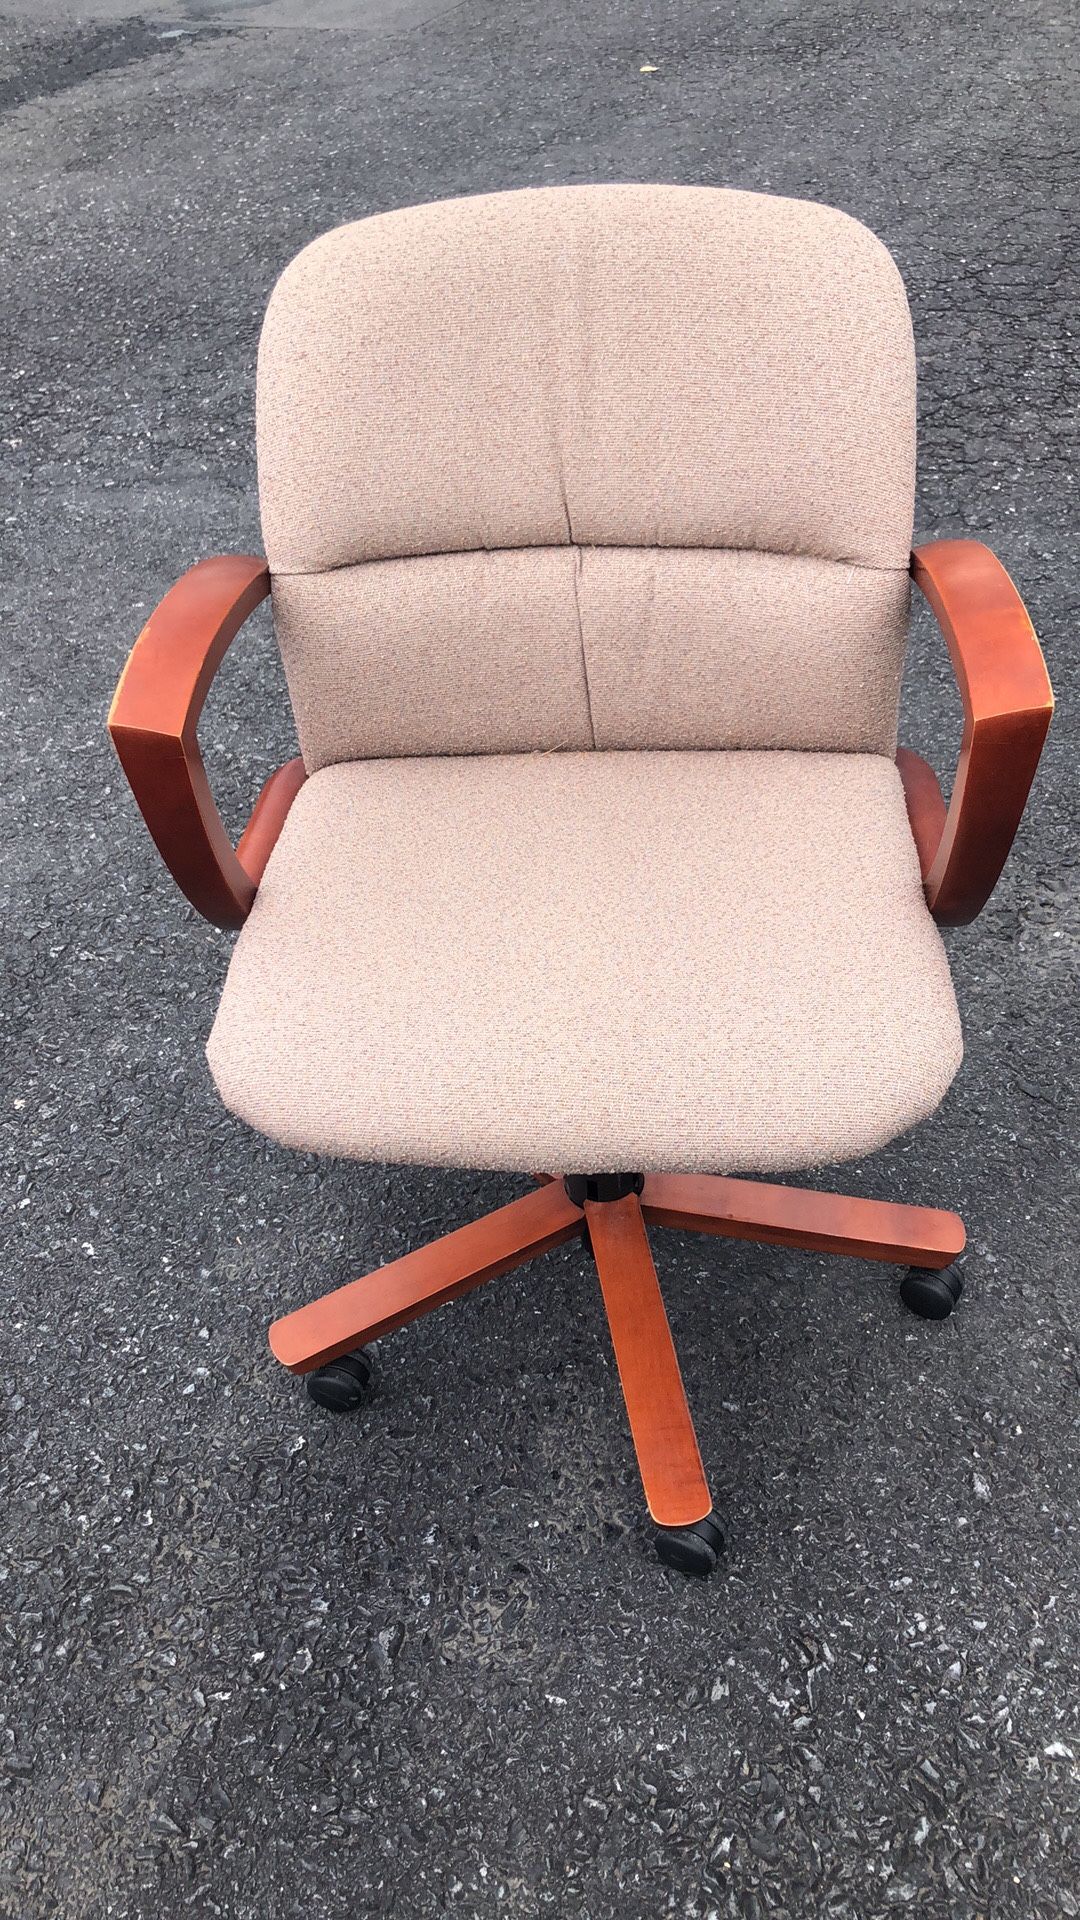 Super Strong And Comfortable Office Chair